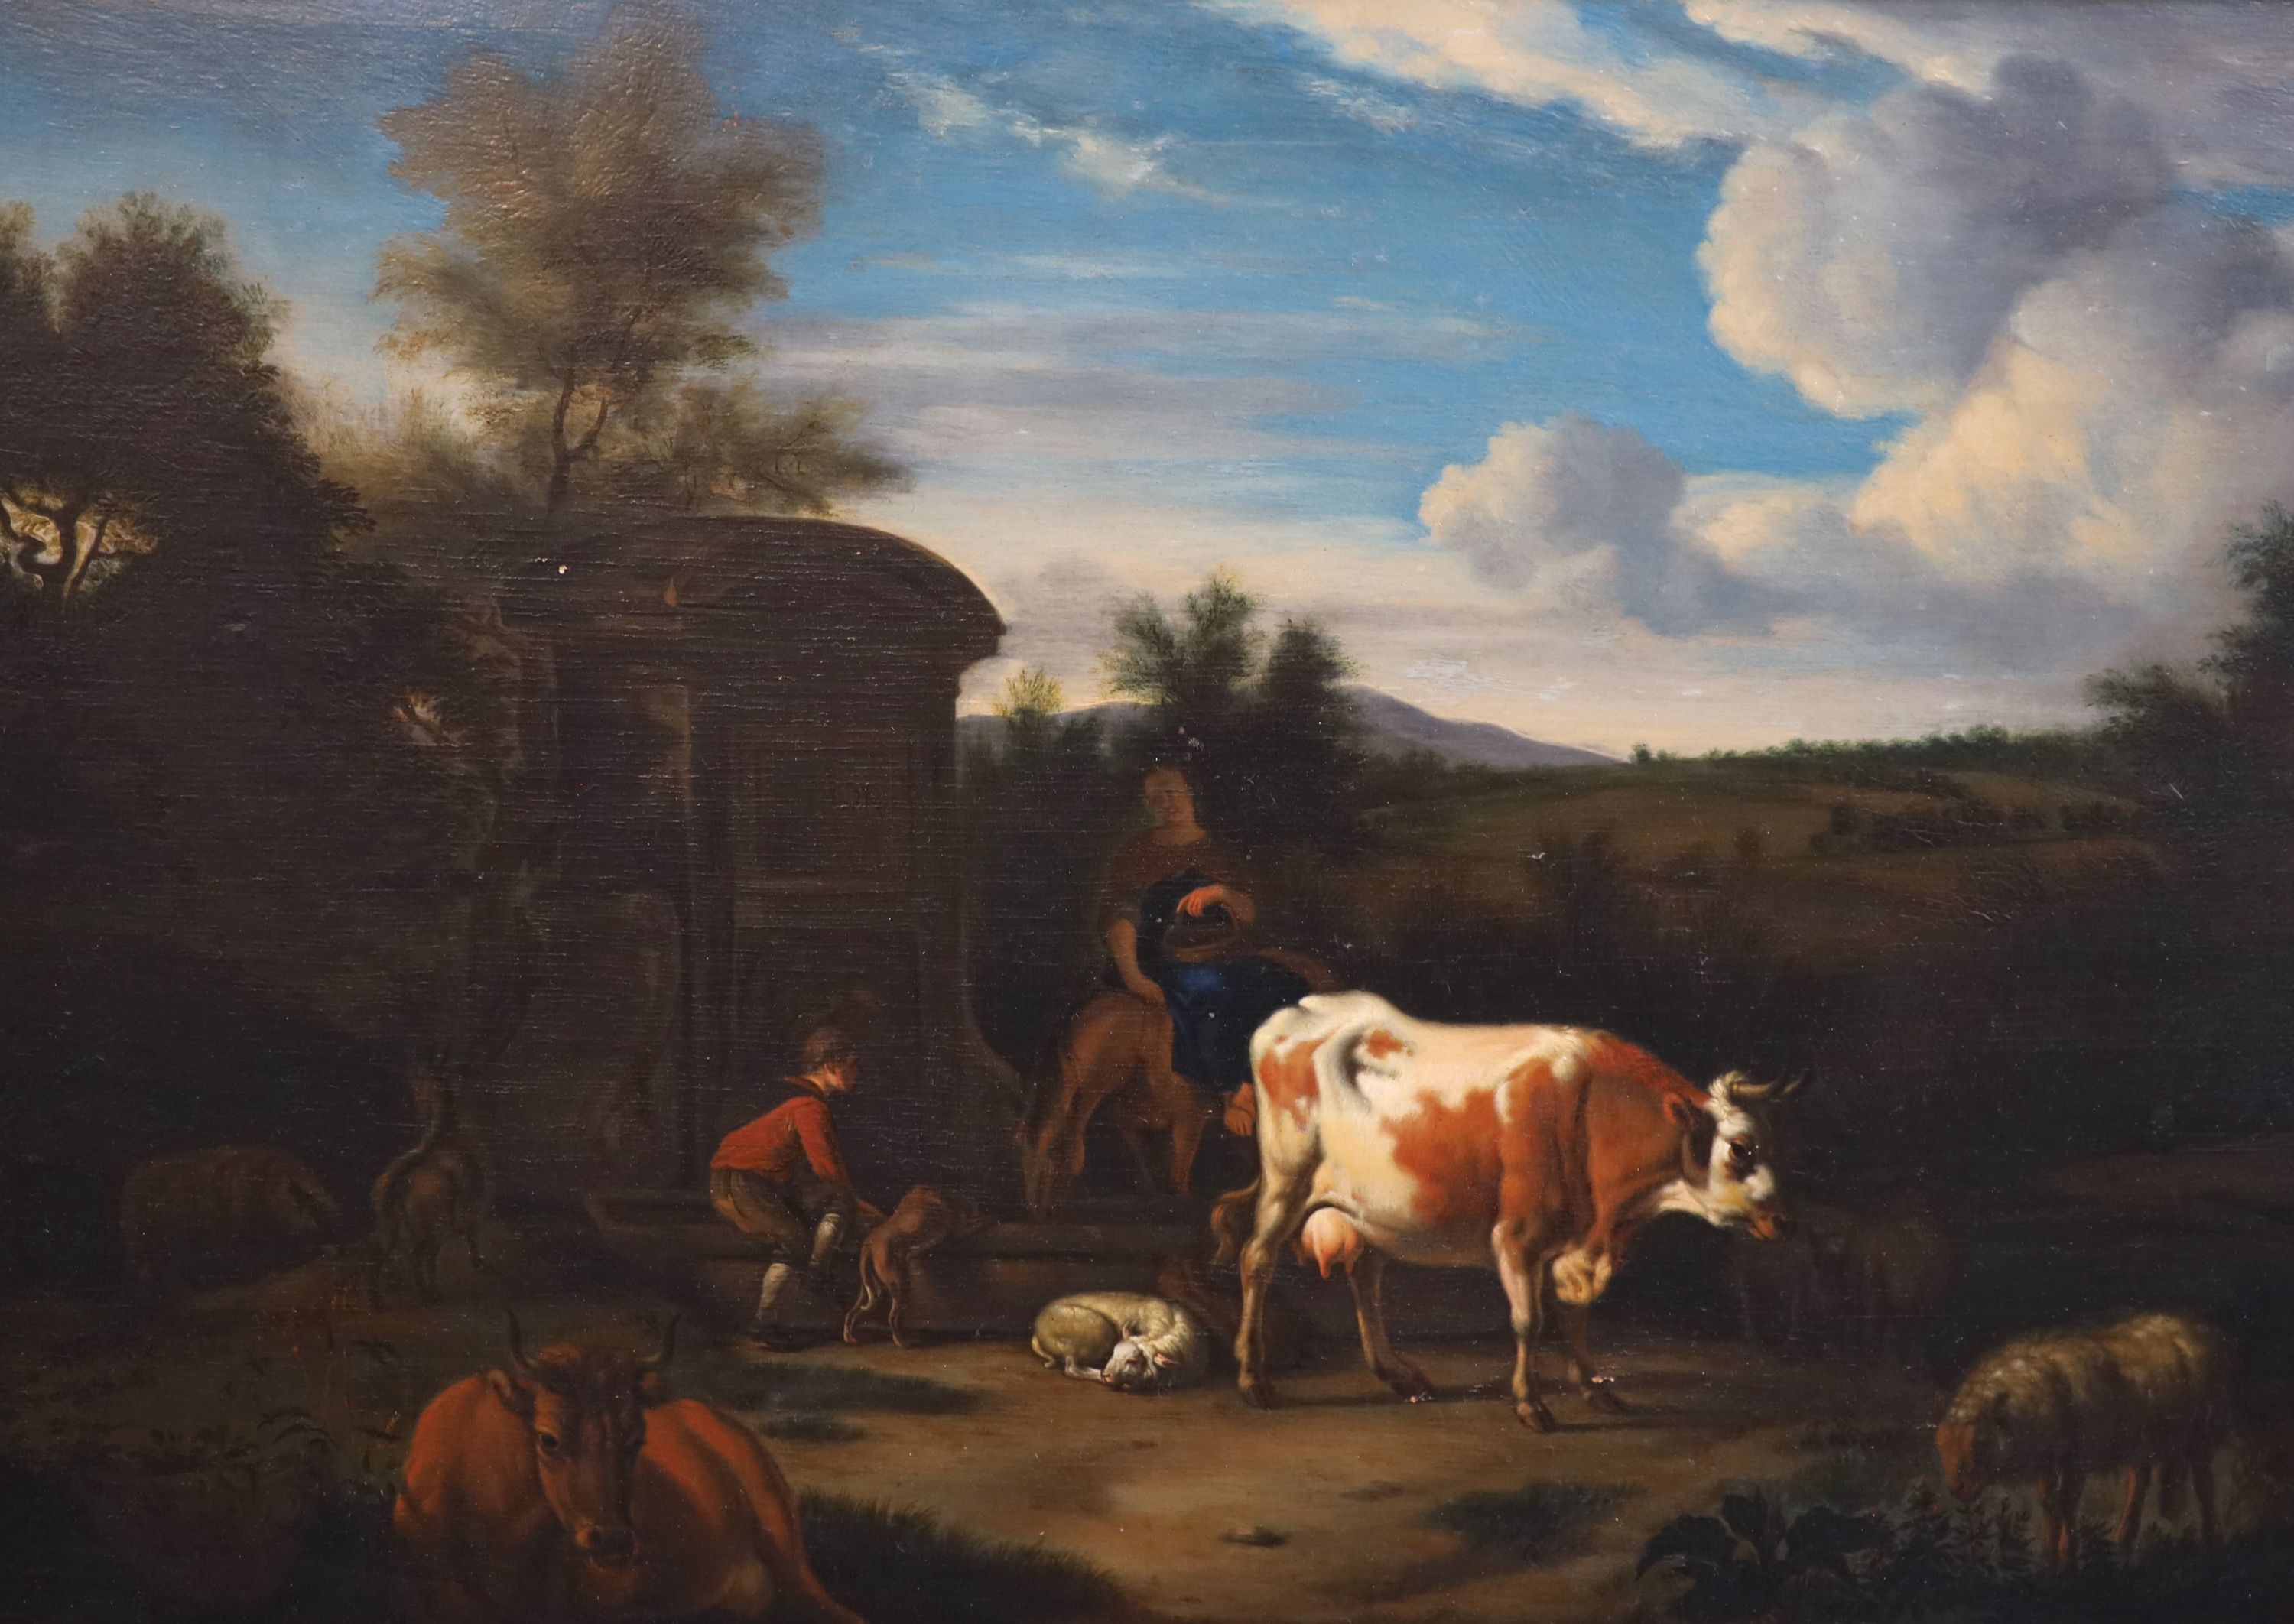 Circle of Dirk Van Den Bergen (1645-1689), Landscape with figures, cattle and sheep beside a Roman well, oil on wooden panel, 34 x 48cm